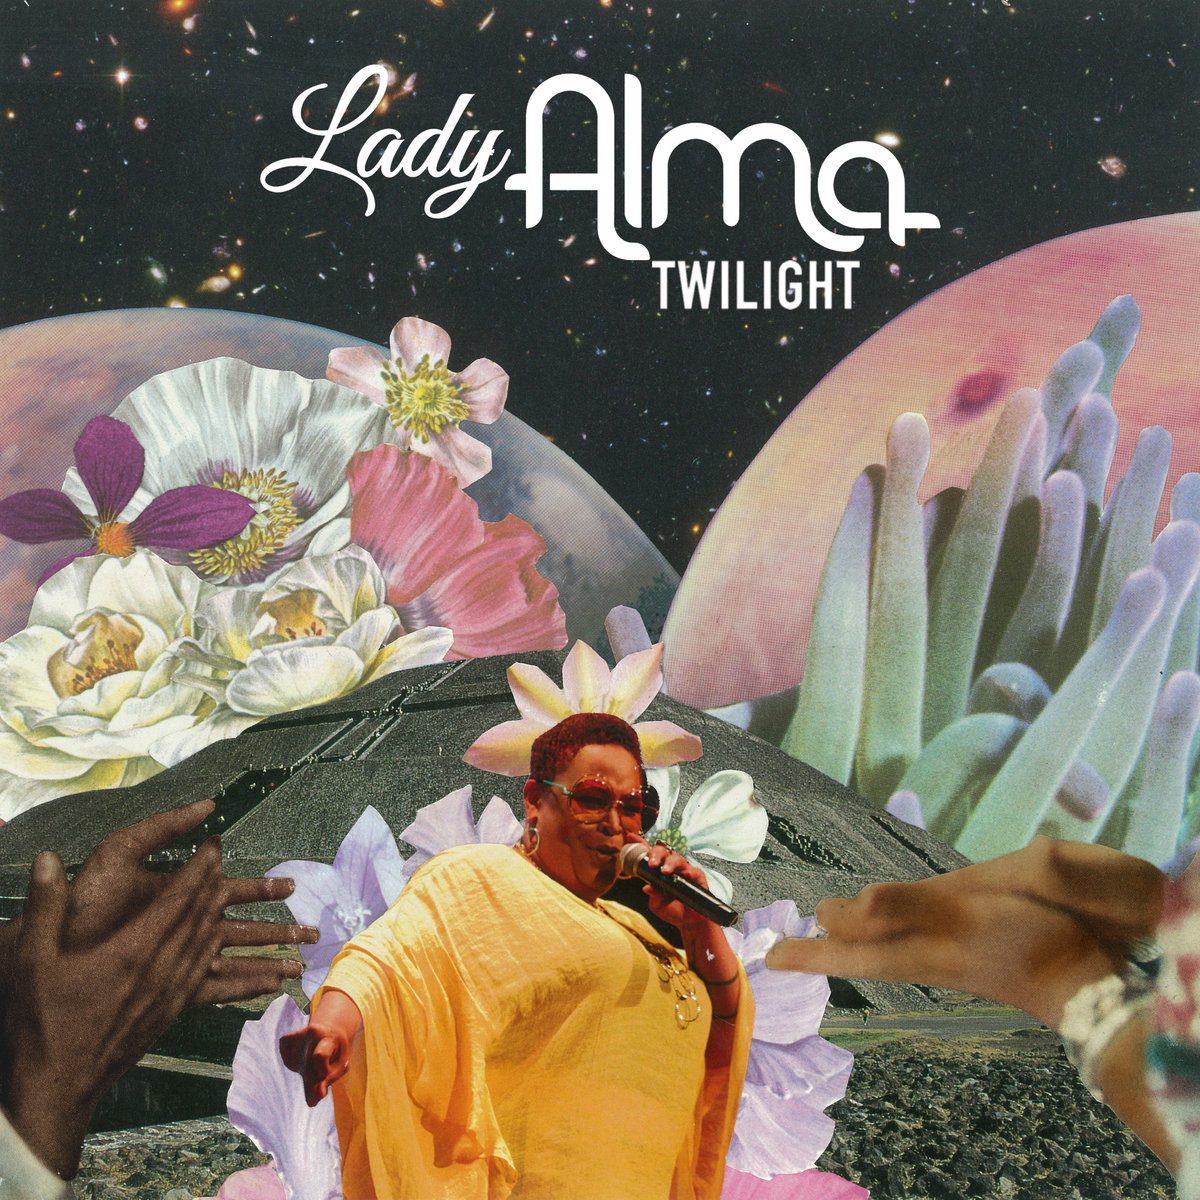 Lady Alma teamed up with Mark de Clive-Lowe for new album "Twilight"